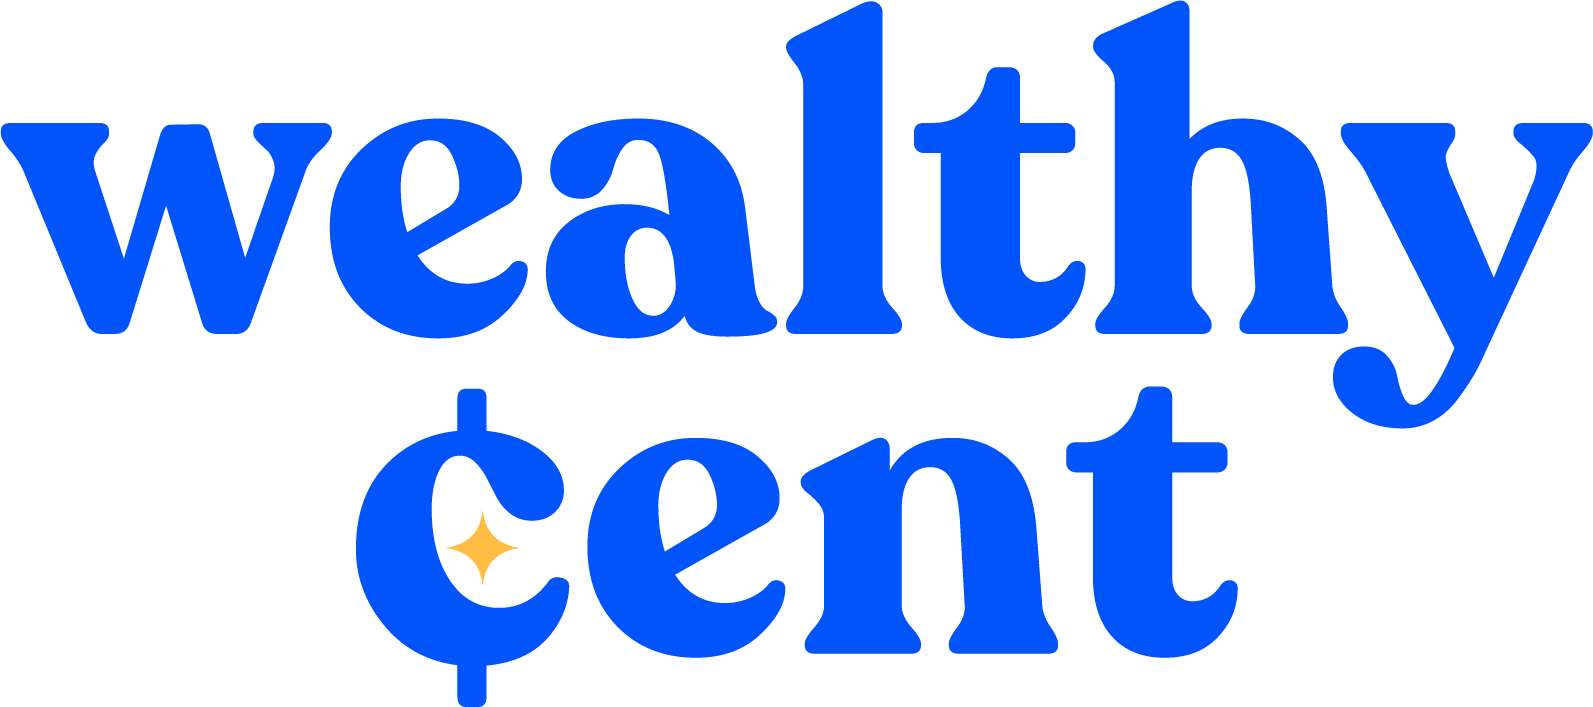 Wealthy Cent logo